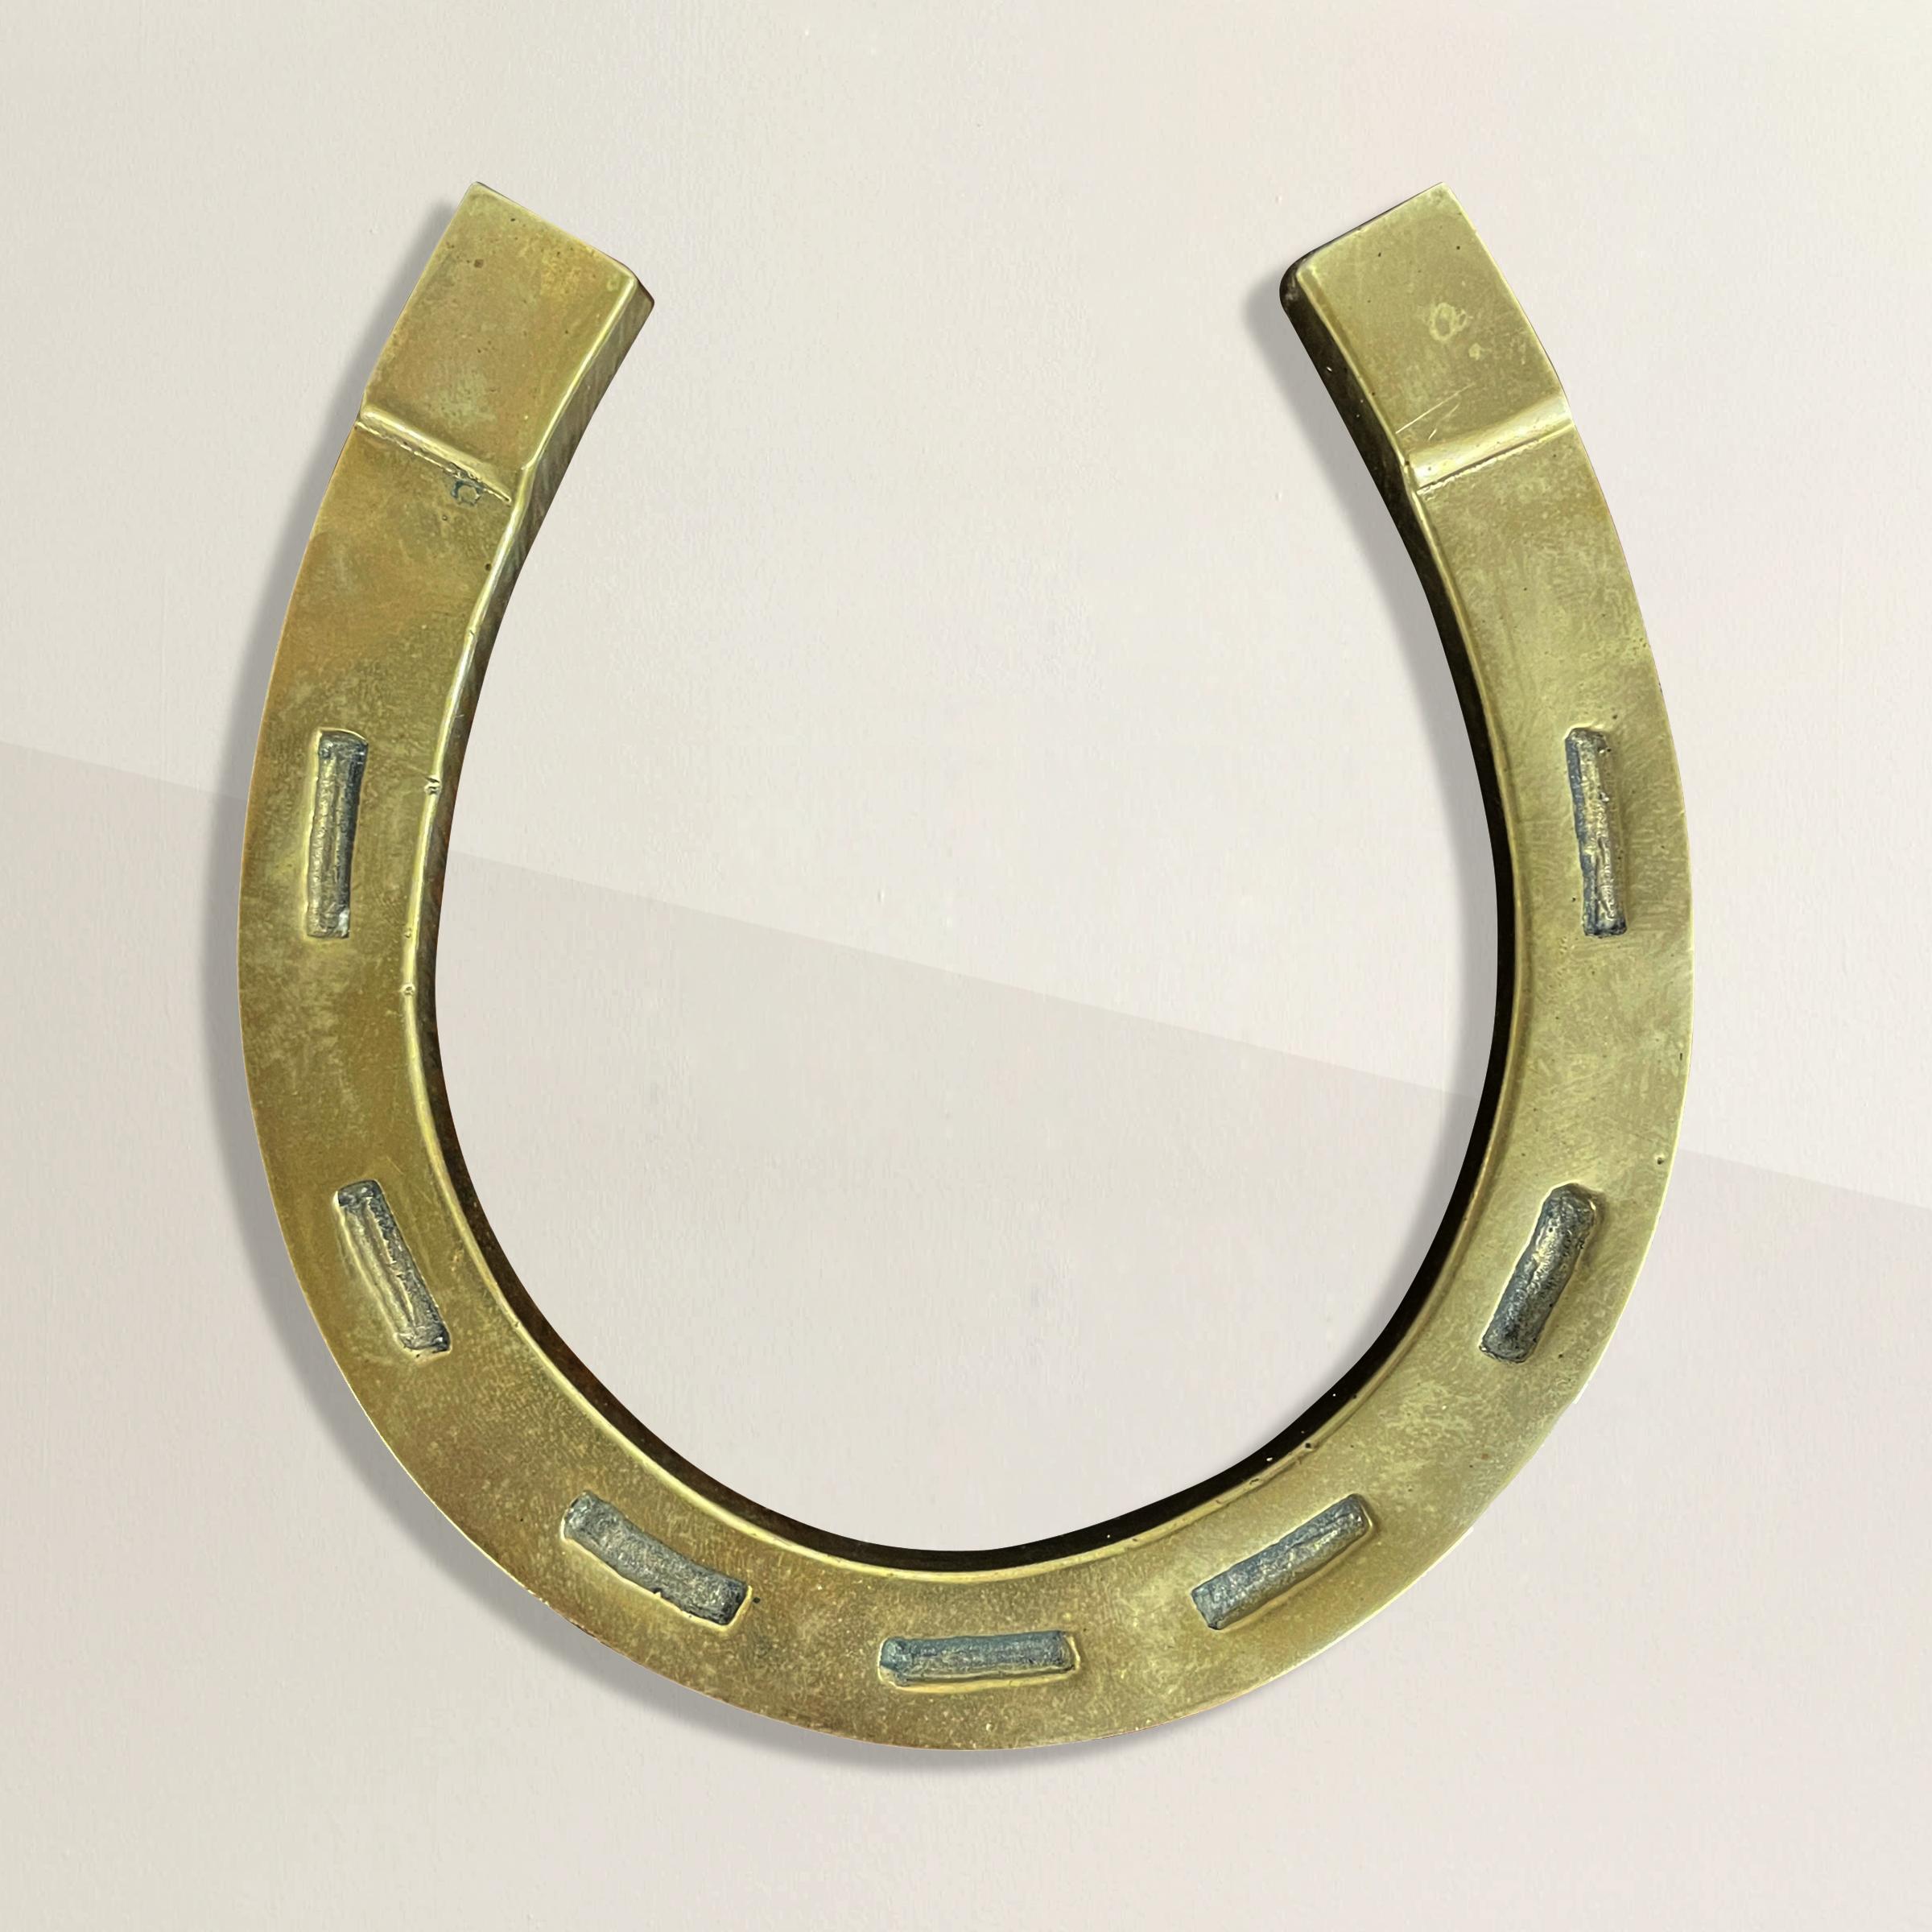 A playful vintage brass horseshoe paperweight meant to bestow good luck, prosperity, and good fortune--or just hold the papers in place on your desk.